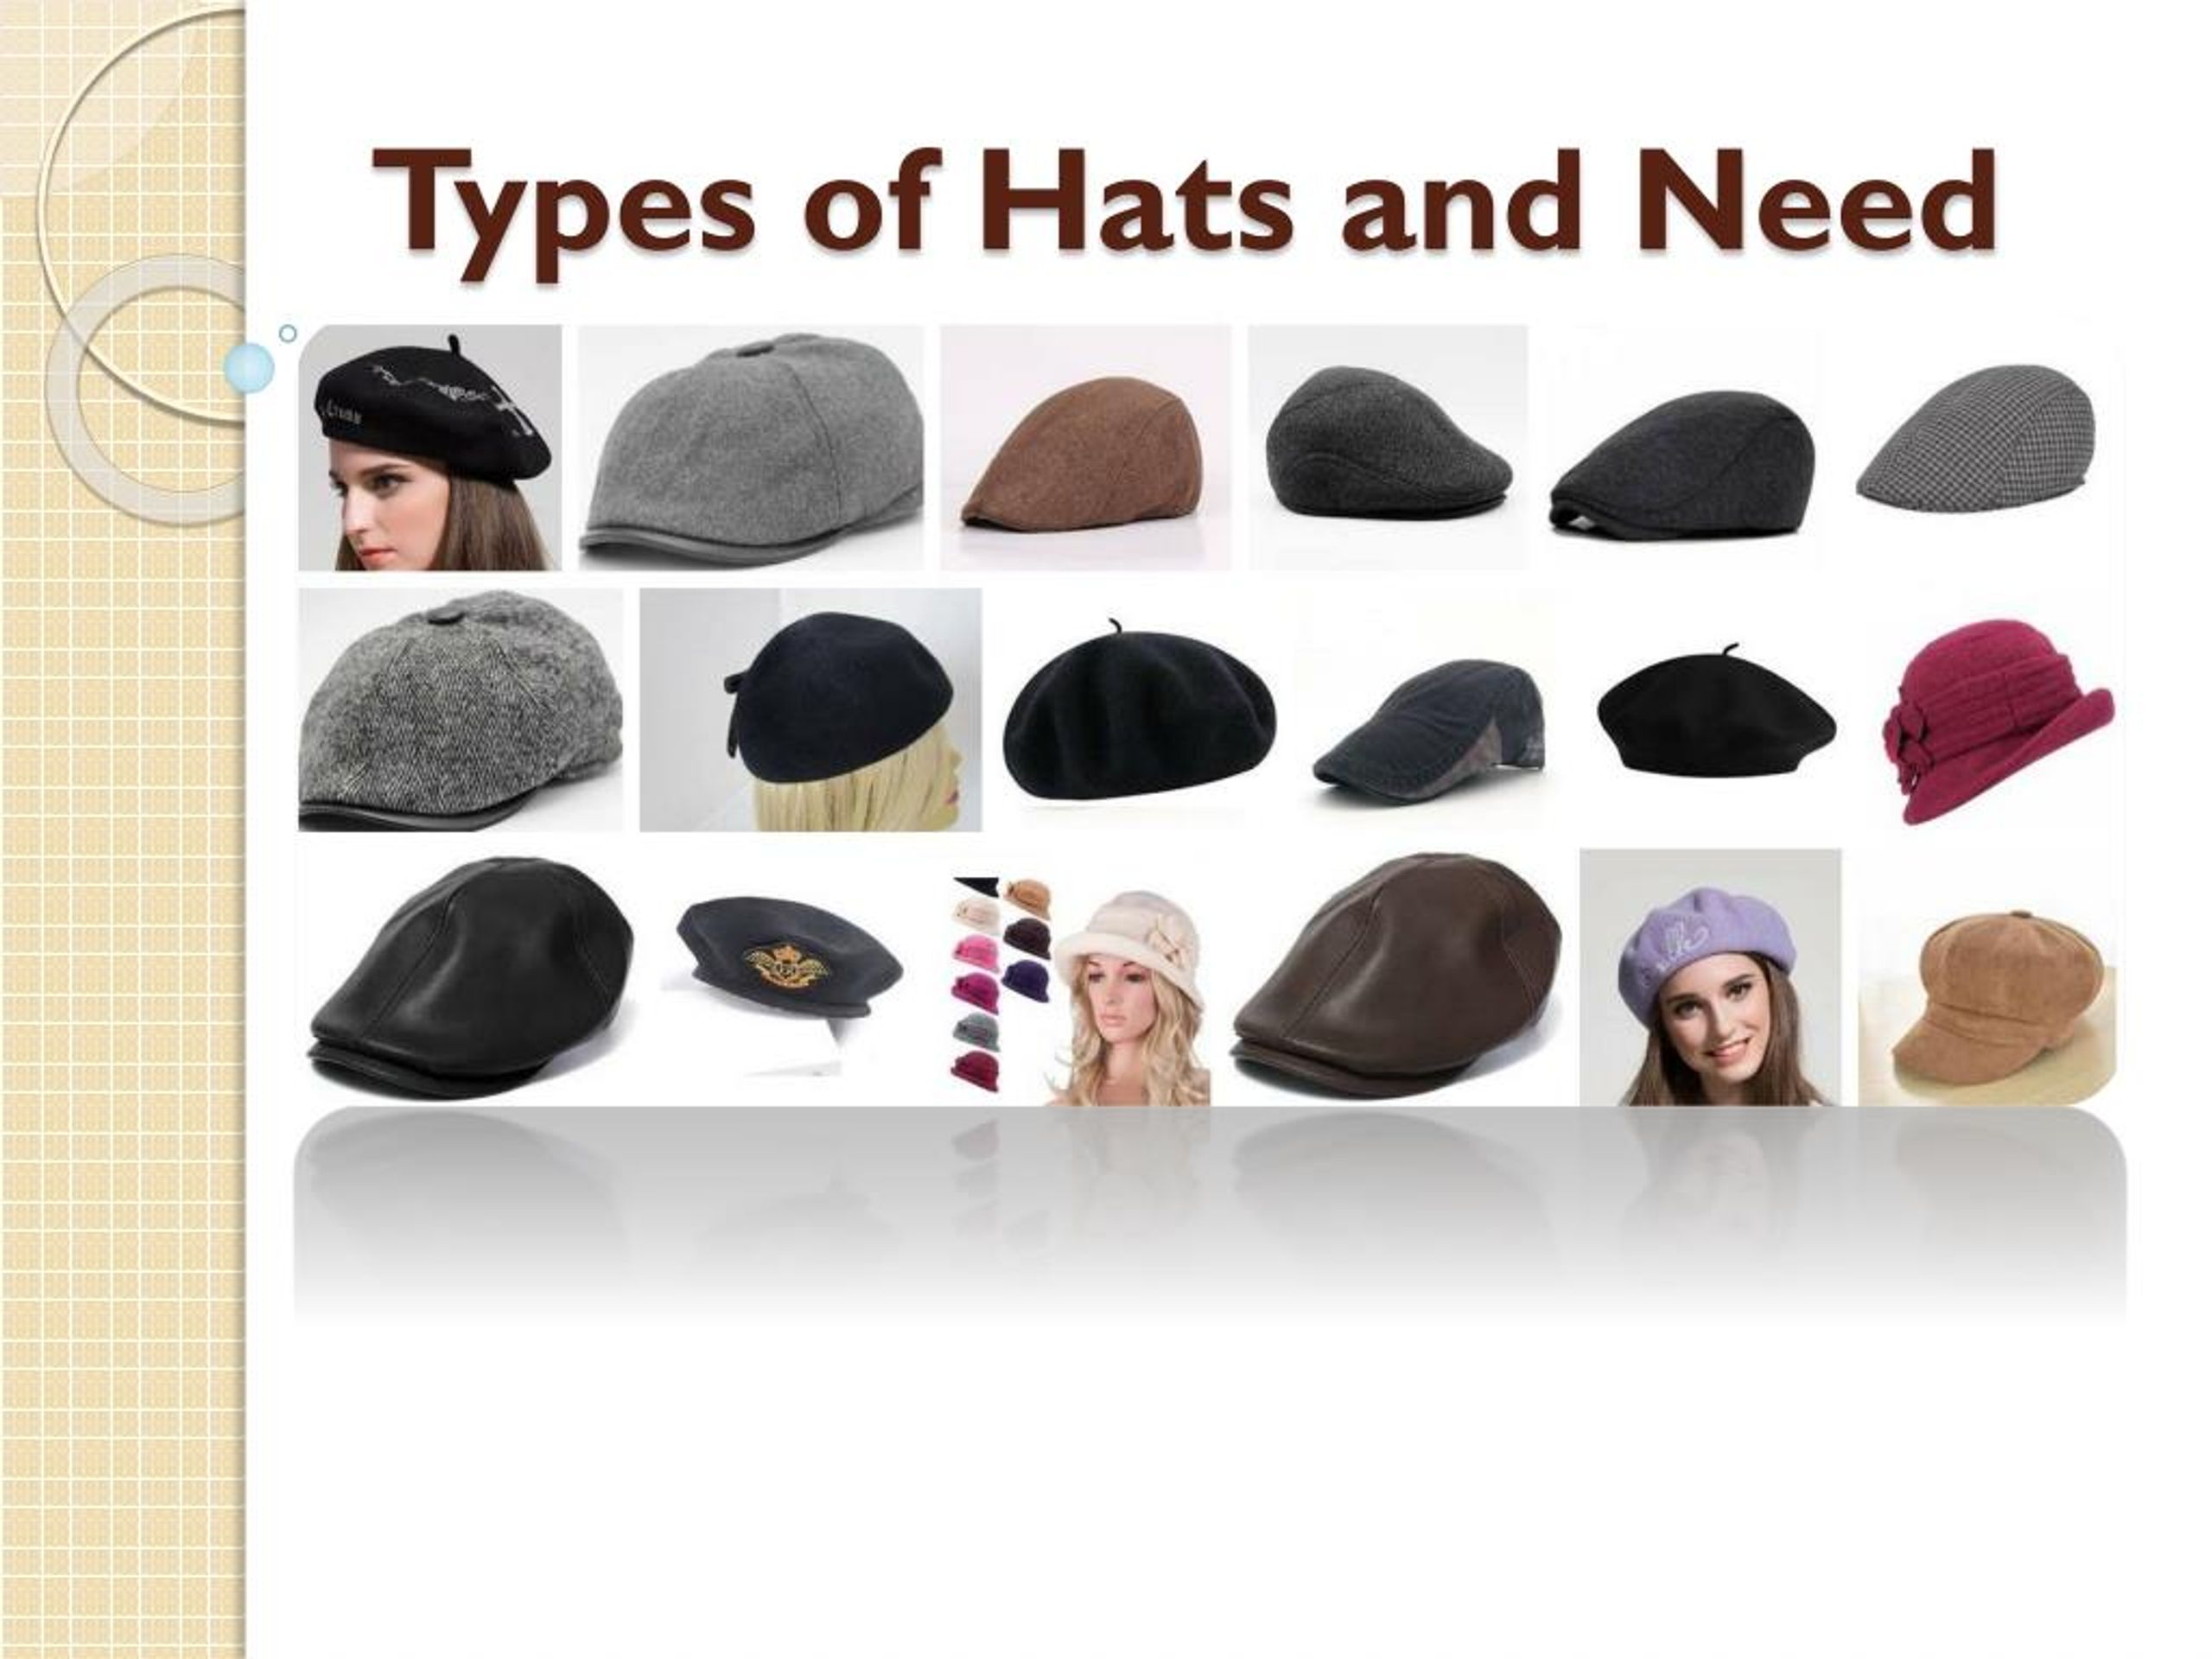 PPT - Types of Hats and Need PowerPoint Presentation, free download ...